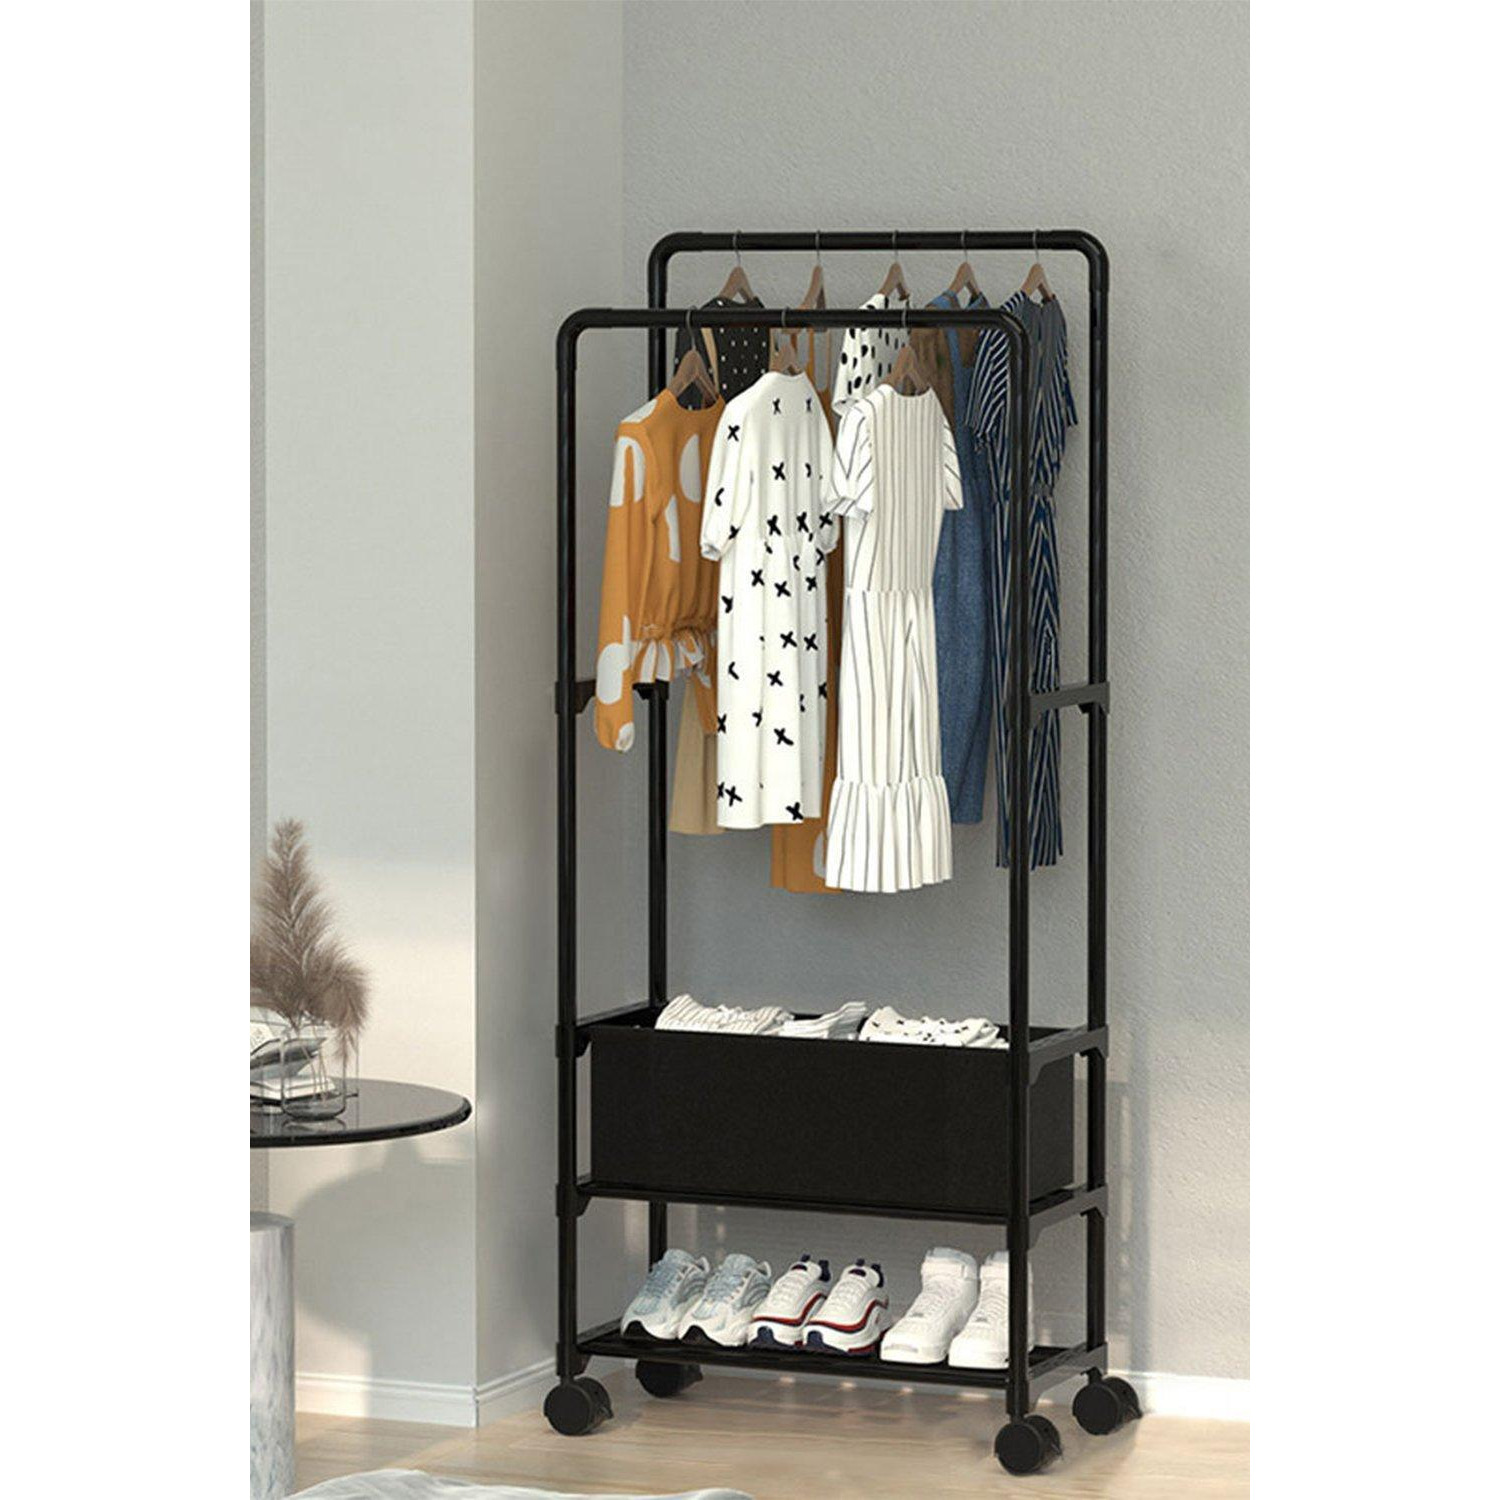 Double Rod Metal Clothes Rack on Wheels - image 1